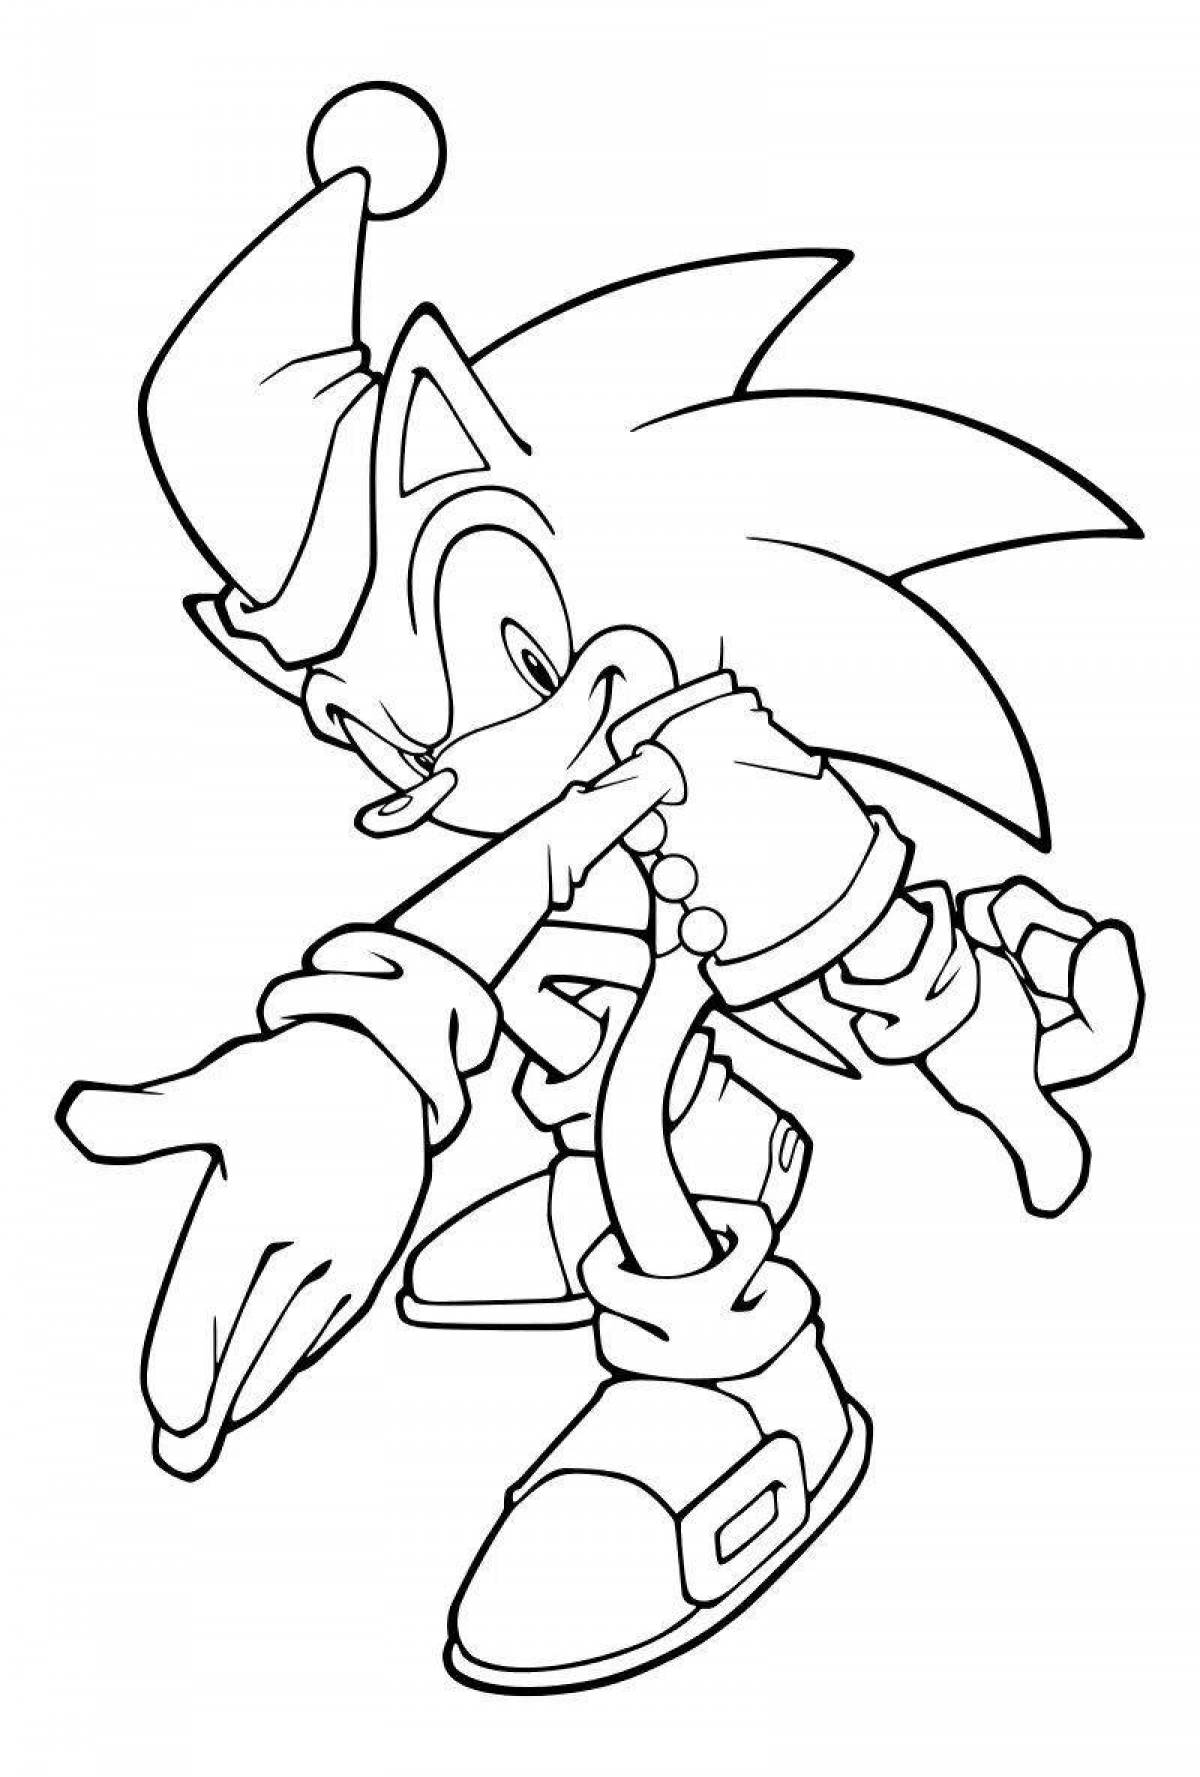 Super hedgehog sonic bold coloring page